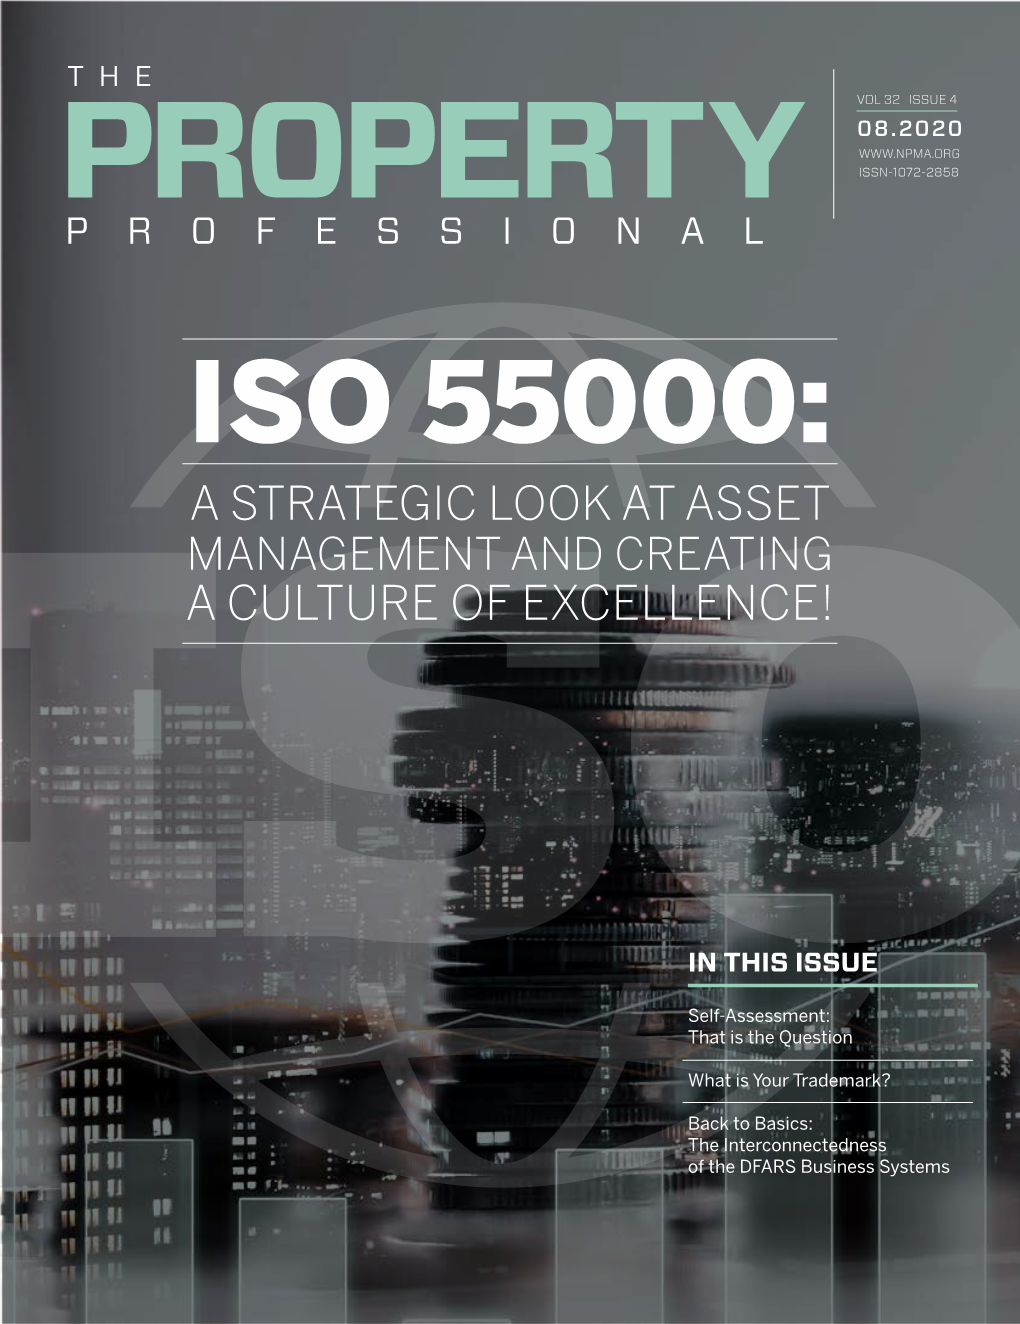 Iso 55000: a Strategic Look at Asset Management and Creating a Culture of Excellence!